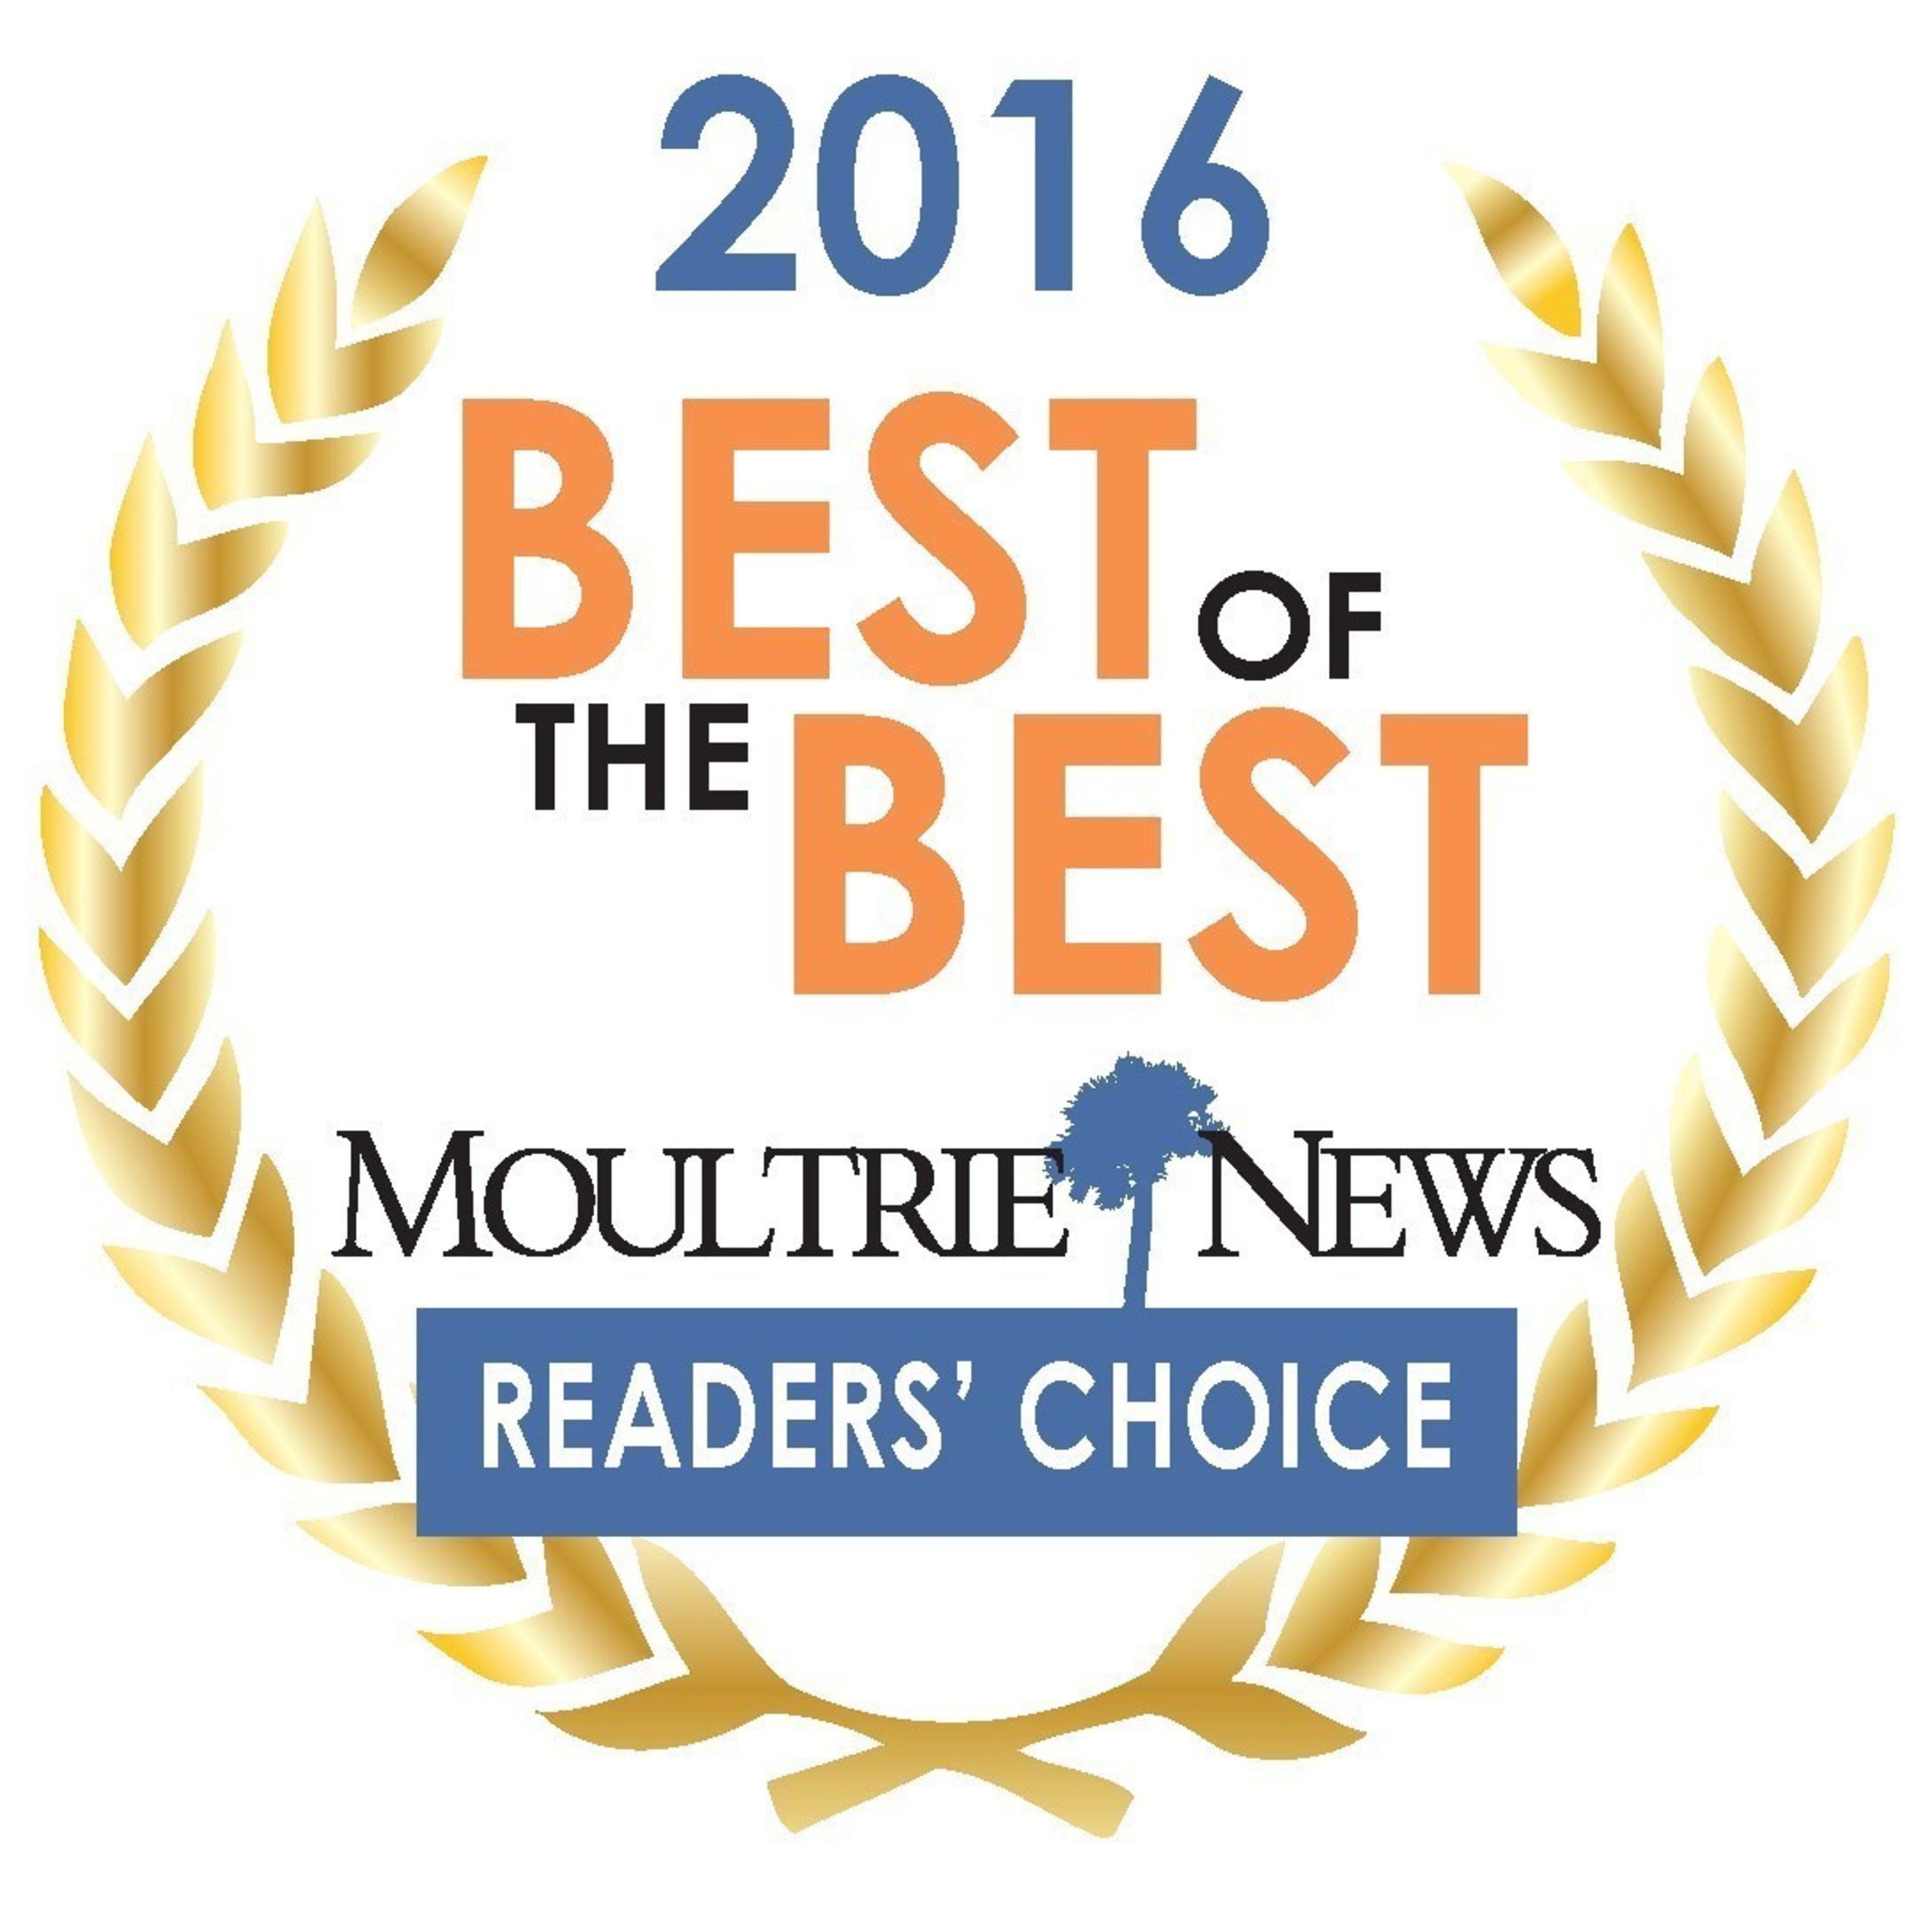 C&C Myers Heating & A/C was recently awarded the 2016 Best of the Best Moultrie News Readers' Choice Award for Best Heating and Air Service and voted runner up in the Best Place to Work category.